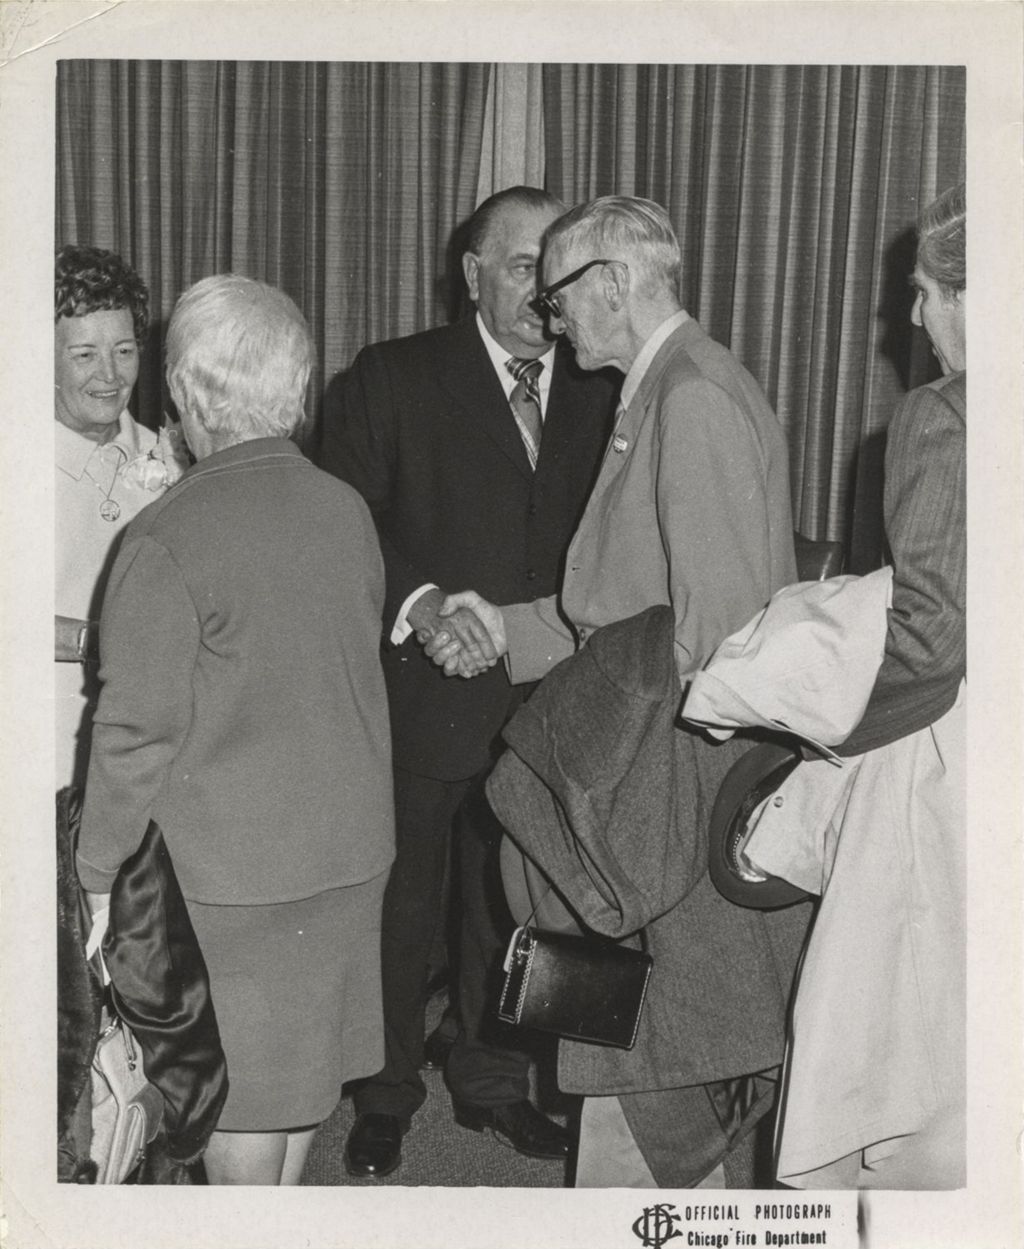 Fifth mayoral inauguration reception, Eleanor and Richard J. Daley greeting well-wishers